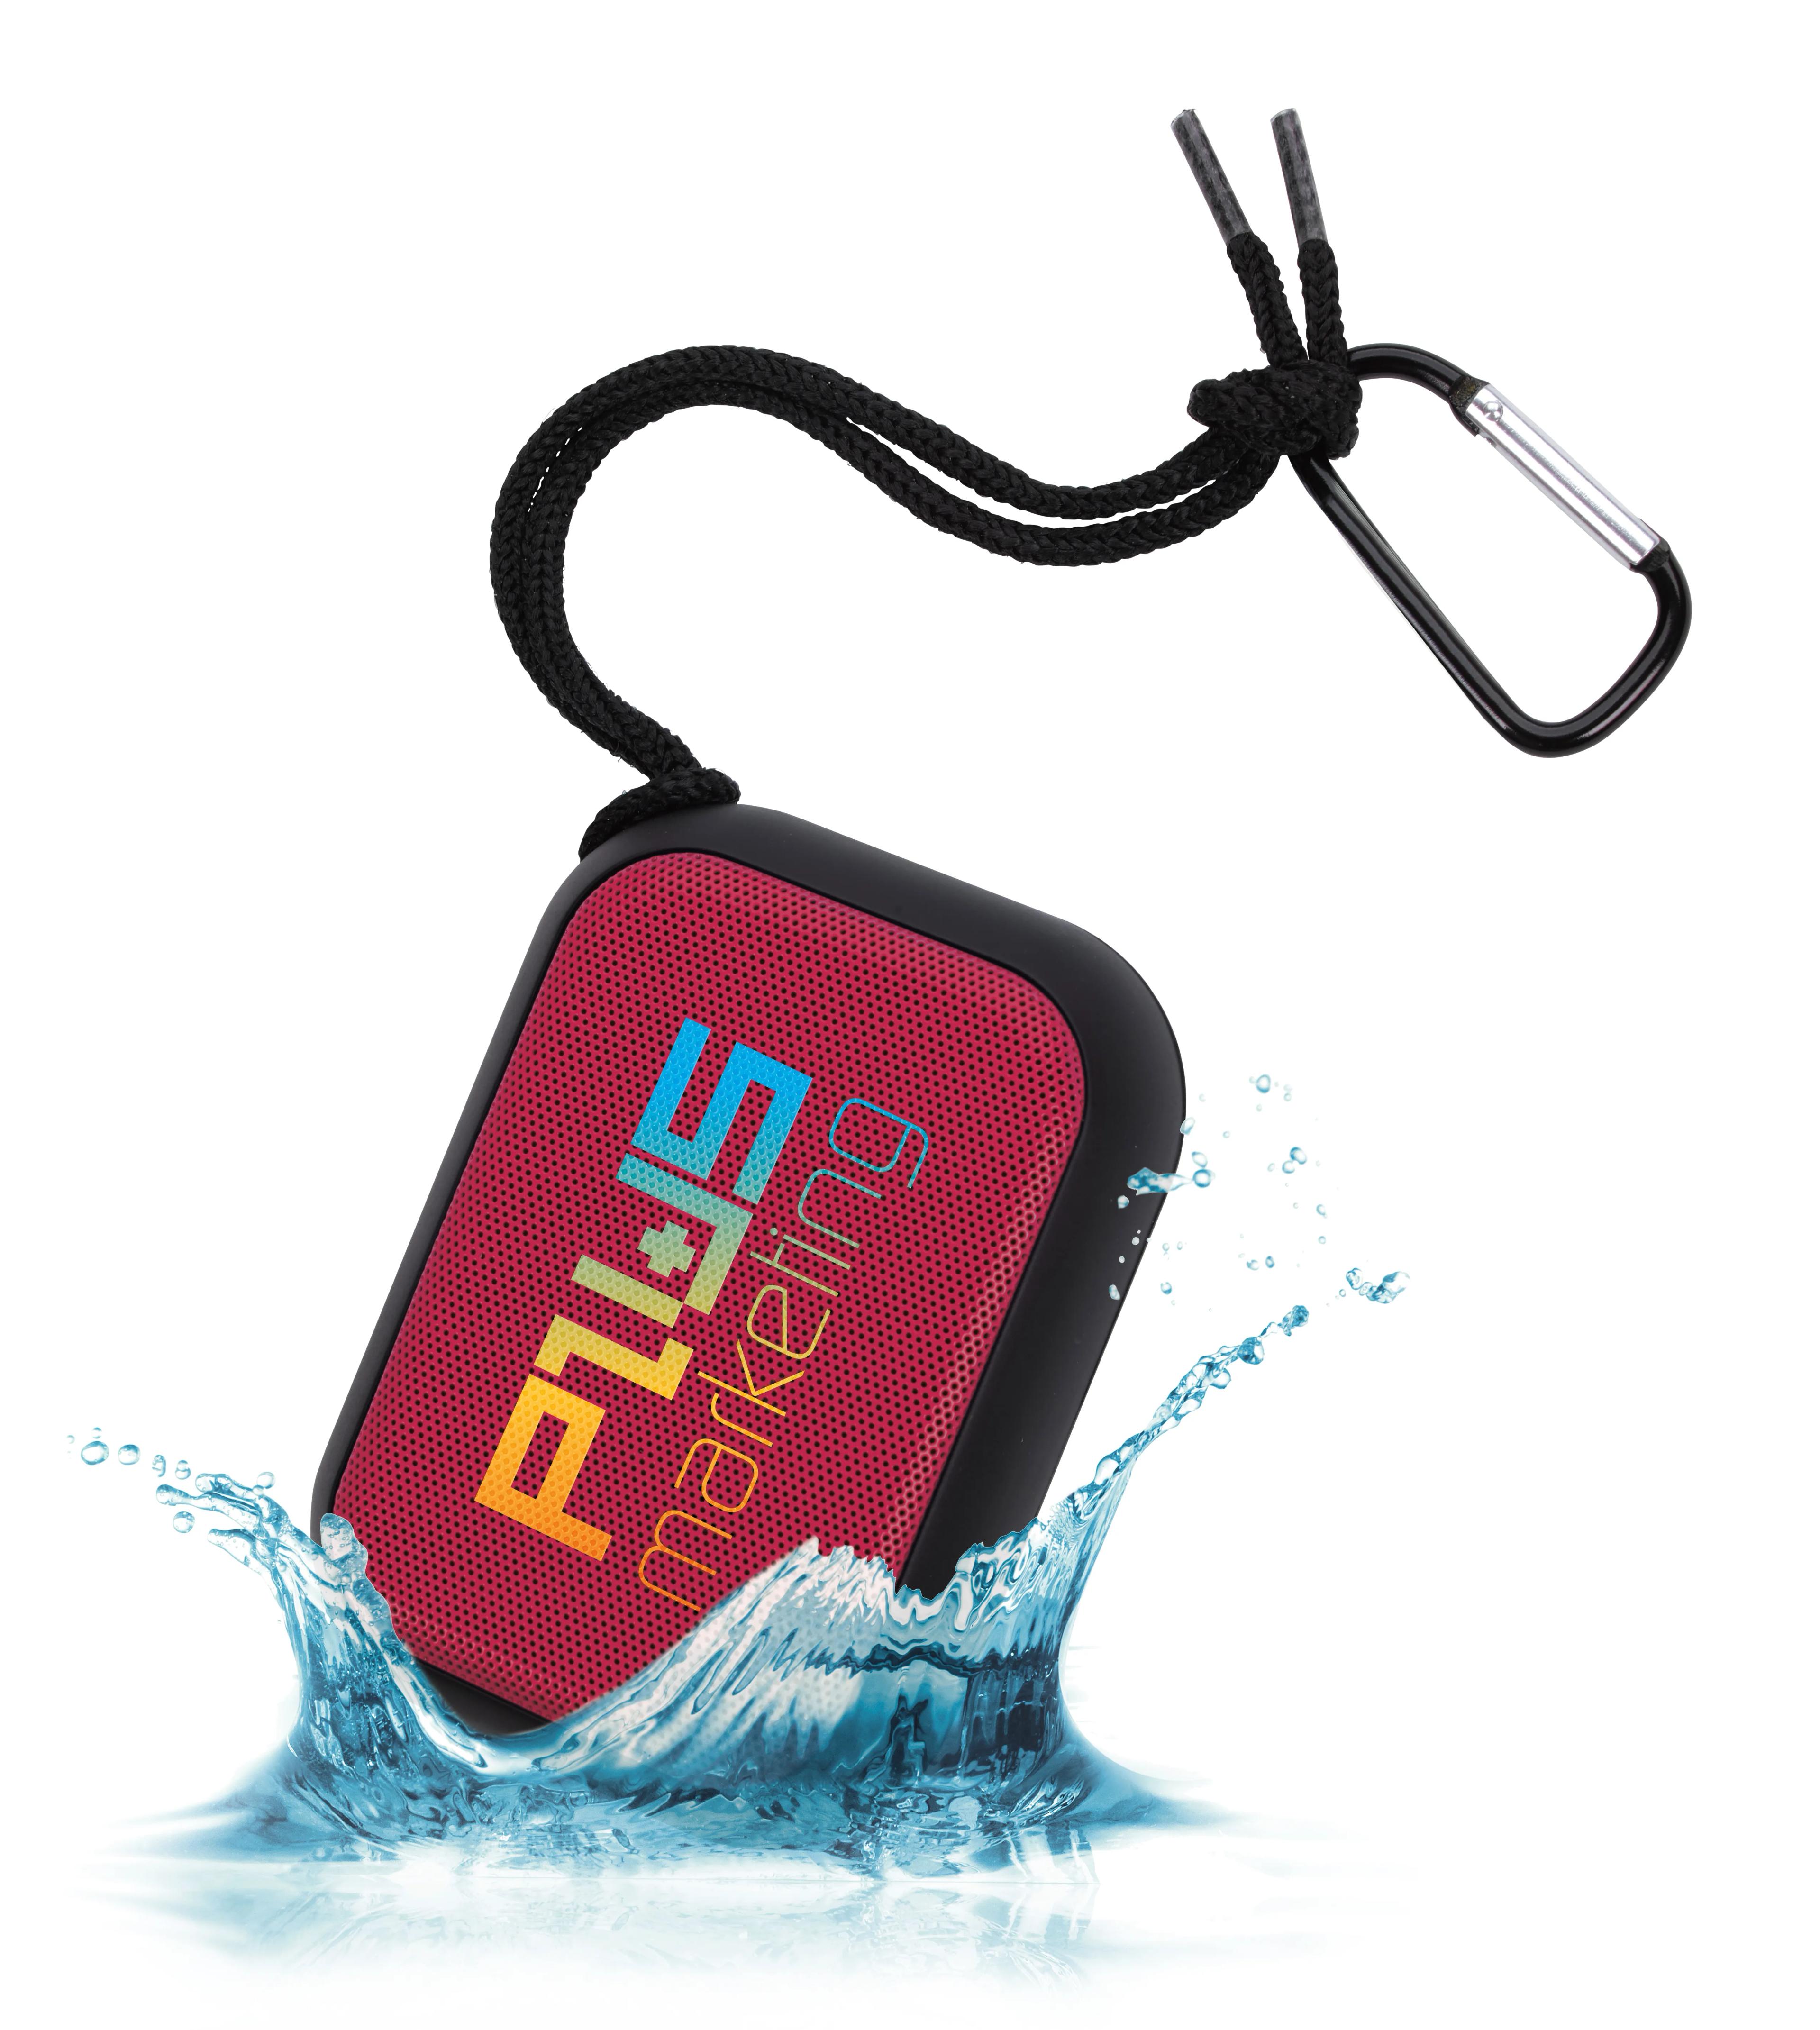 Travel-Size Water-resistant Bluetooth® Speaker 22 of 22